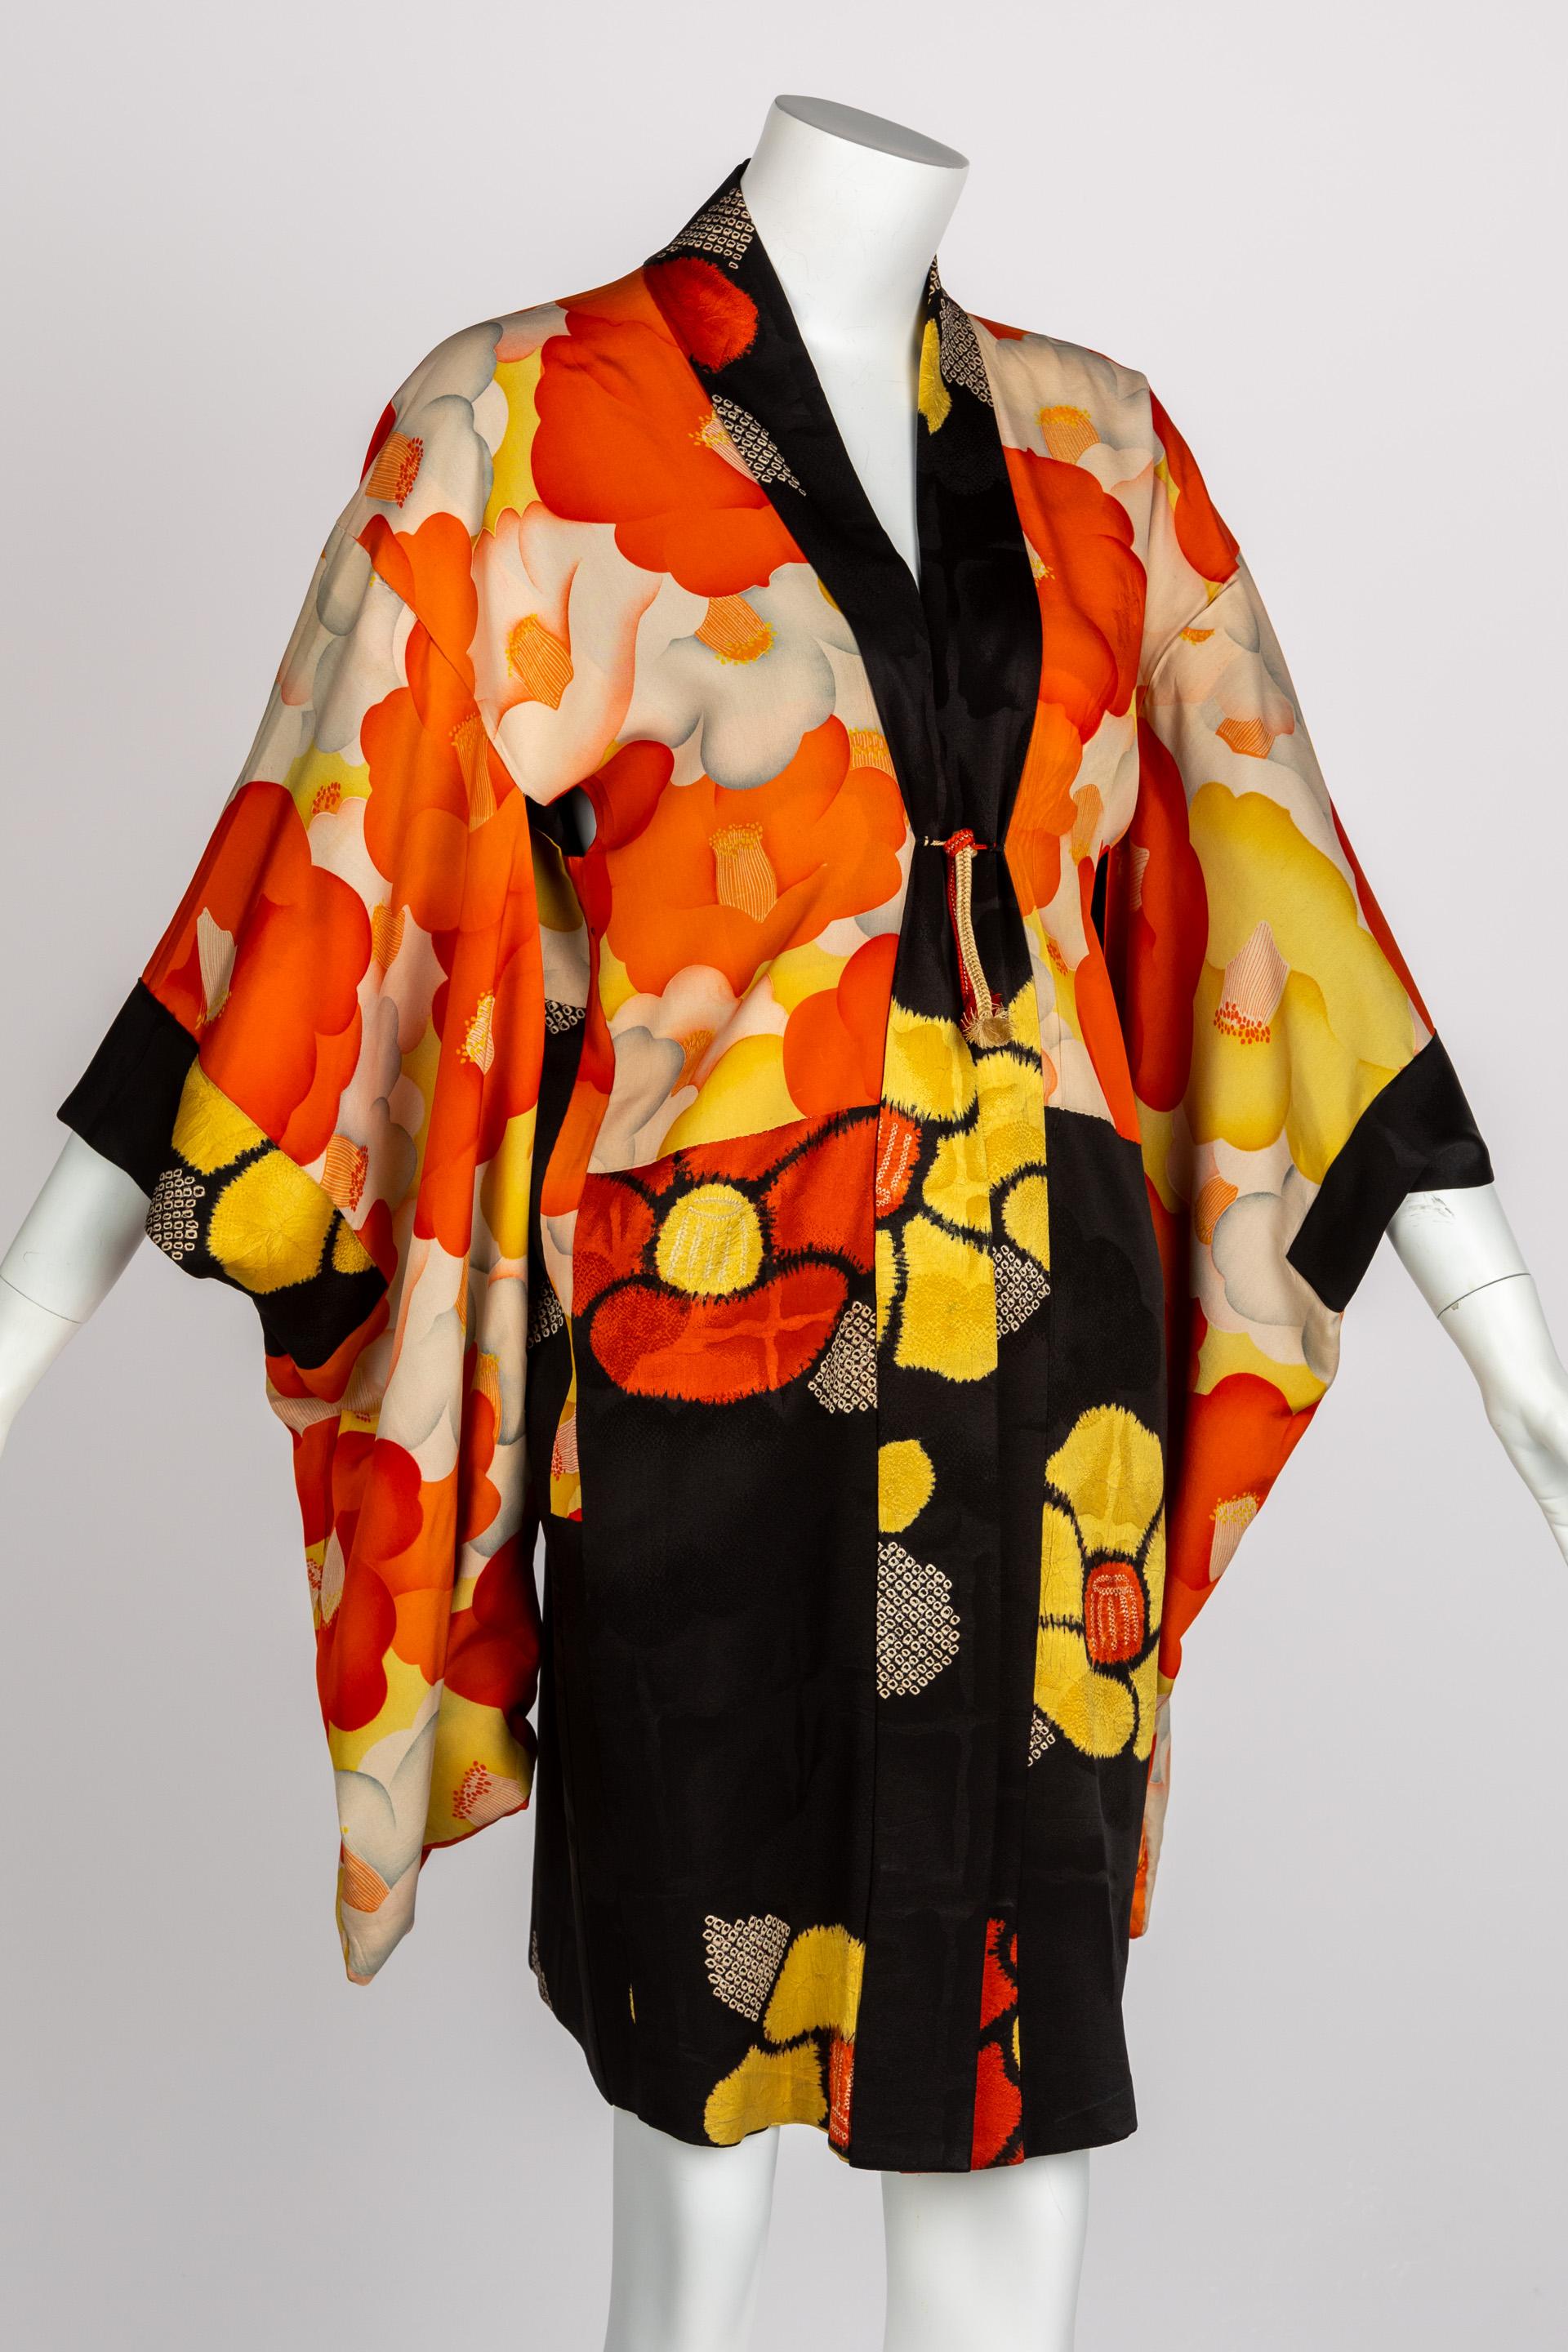 As fashion in Japan began to skyrocket, the strong presence of the traditional kimono still remains. The straight cuts of silk are carefully sewn together, crafting a robe that can fit every figure, making it easy to wear and infinitely adaptable.